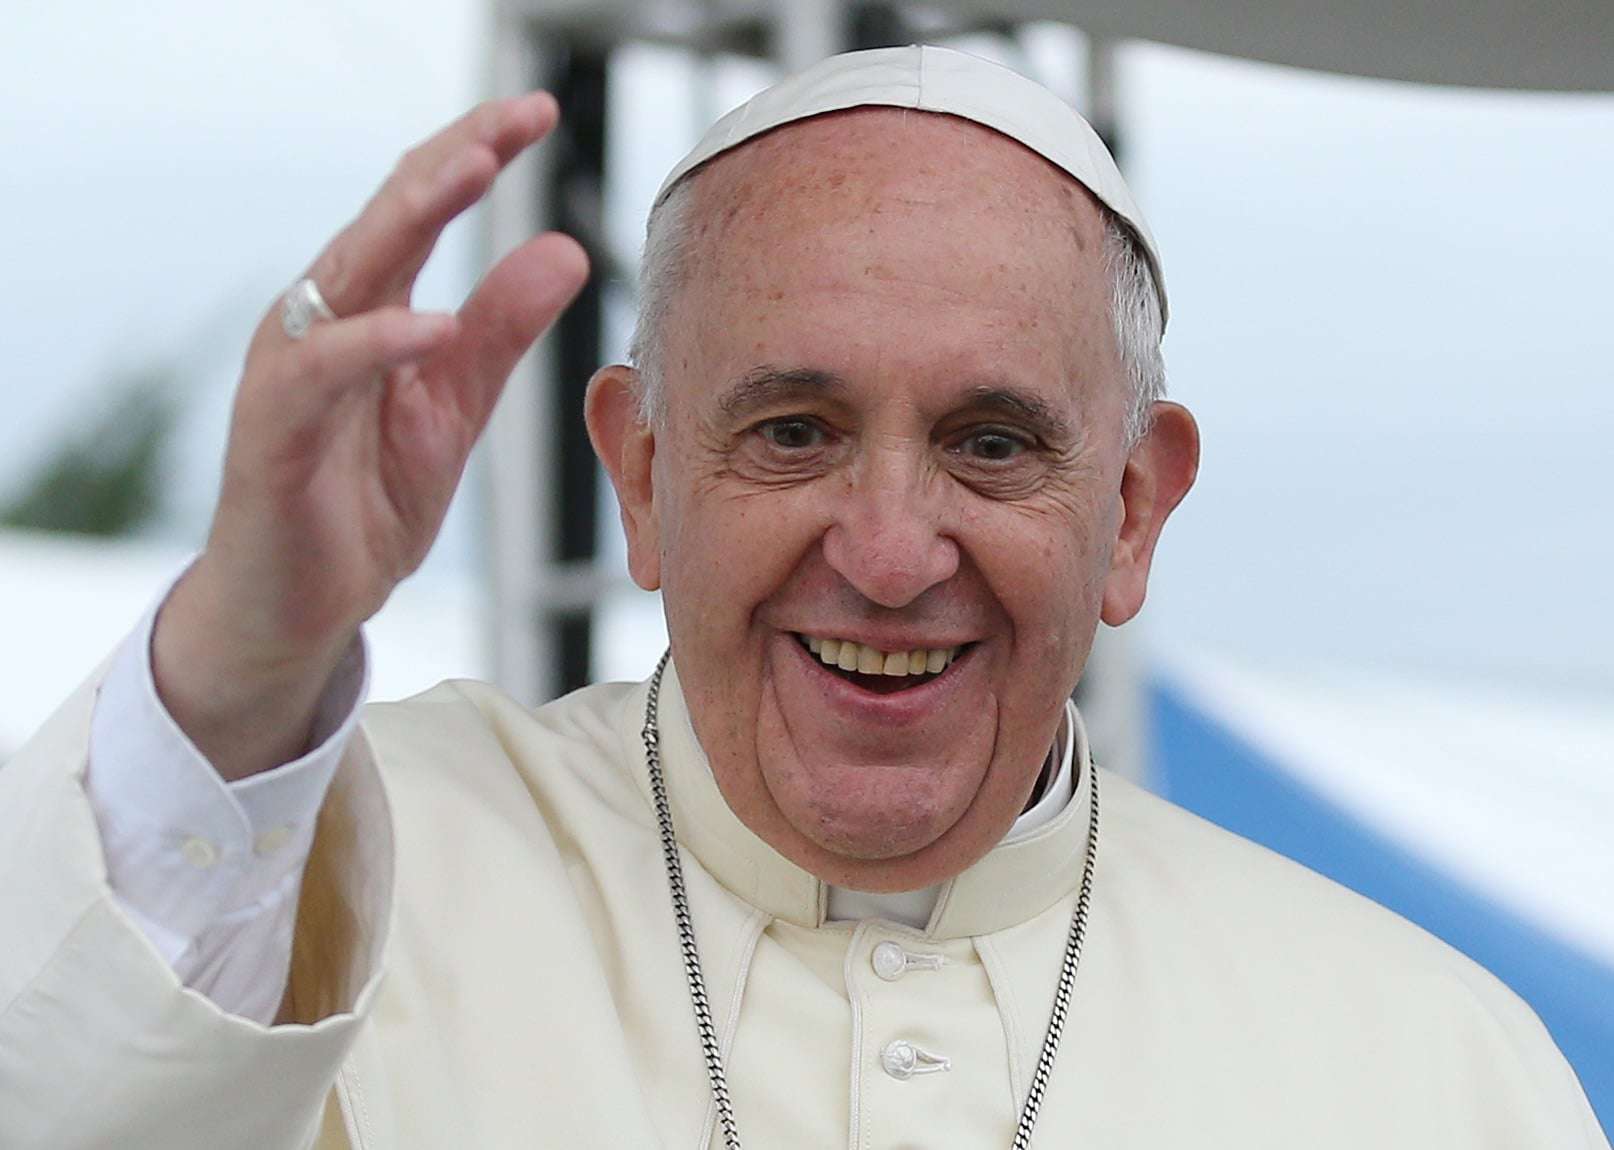 Pope Francis has advanced the thought of his two predecessors in communicating the Church's social teaching to the world.